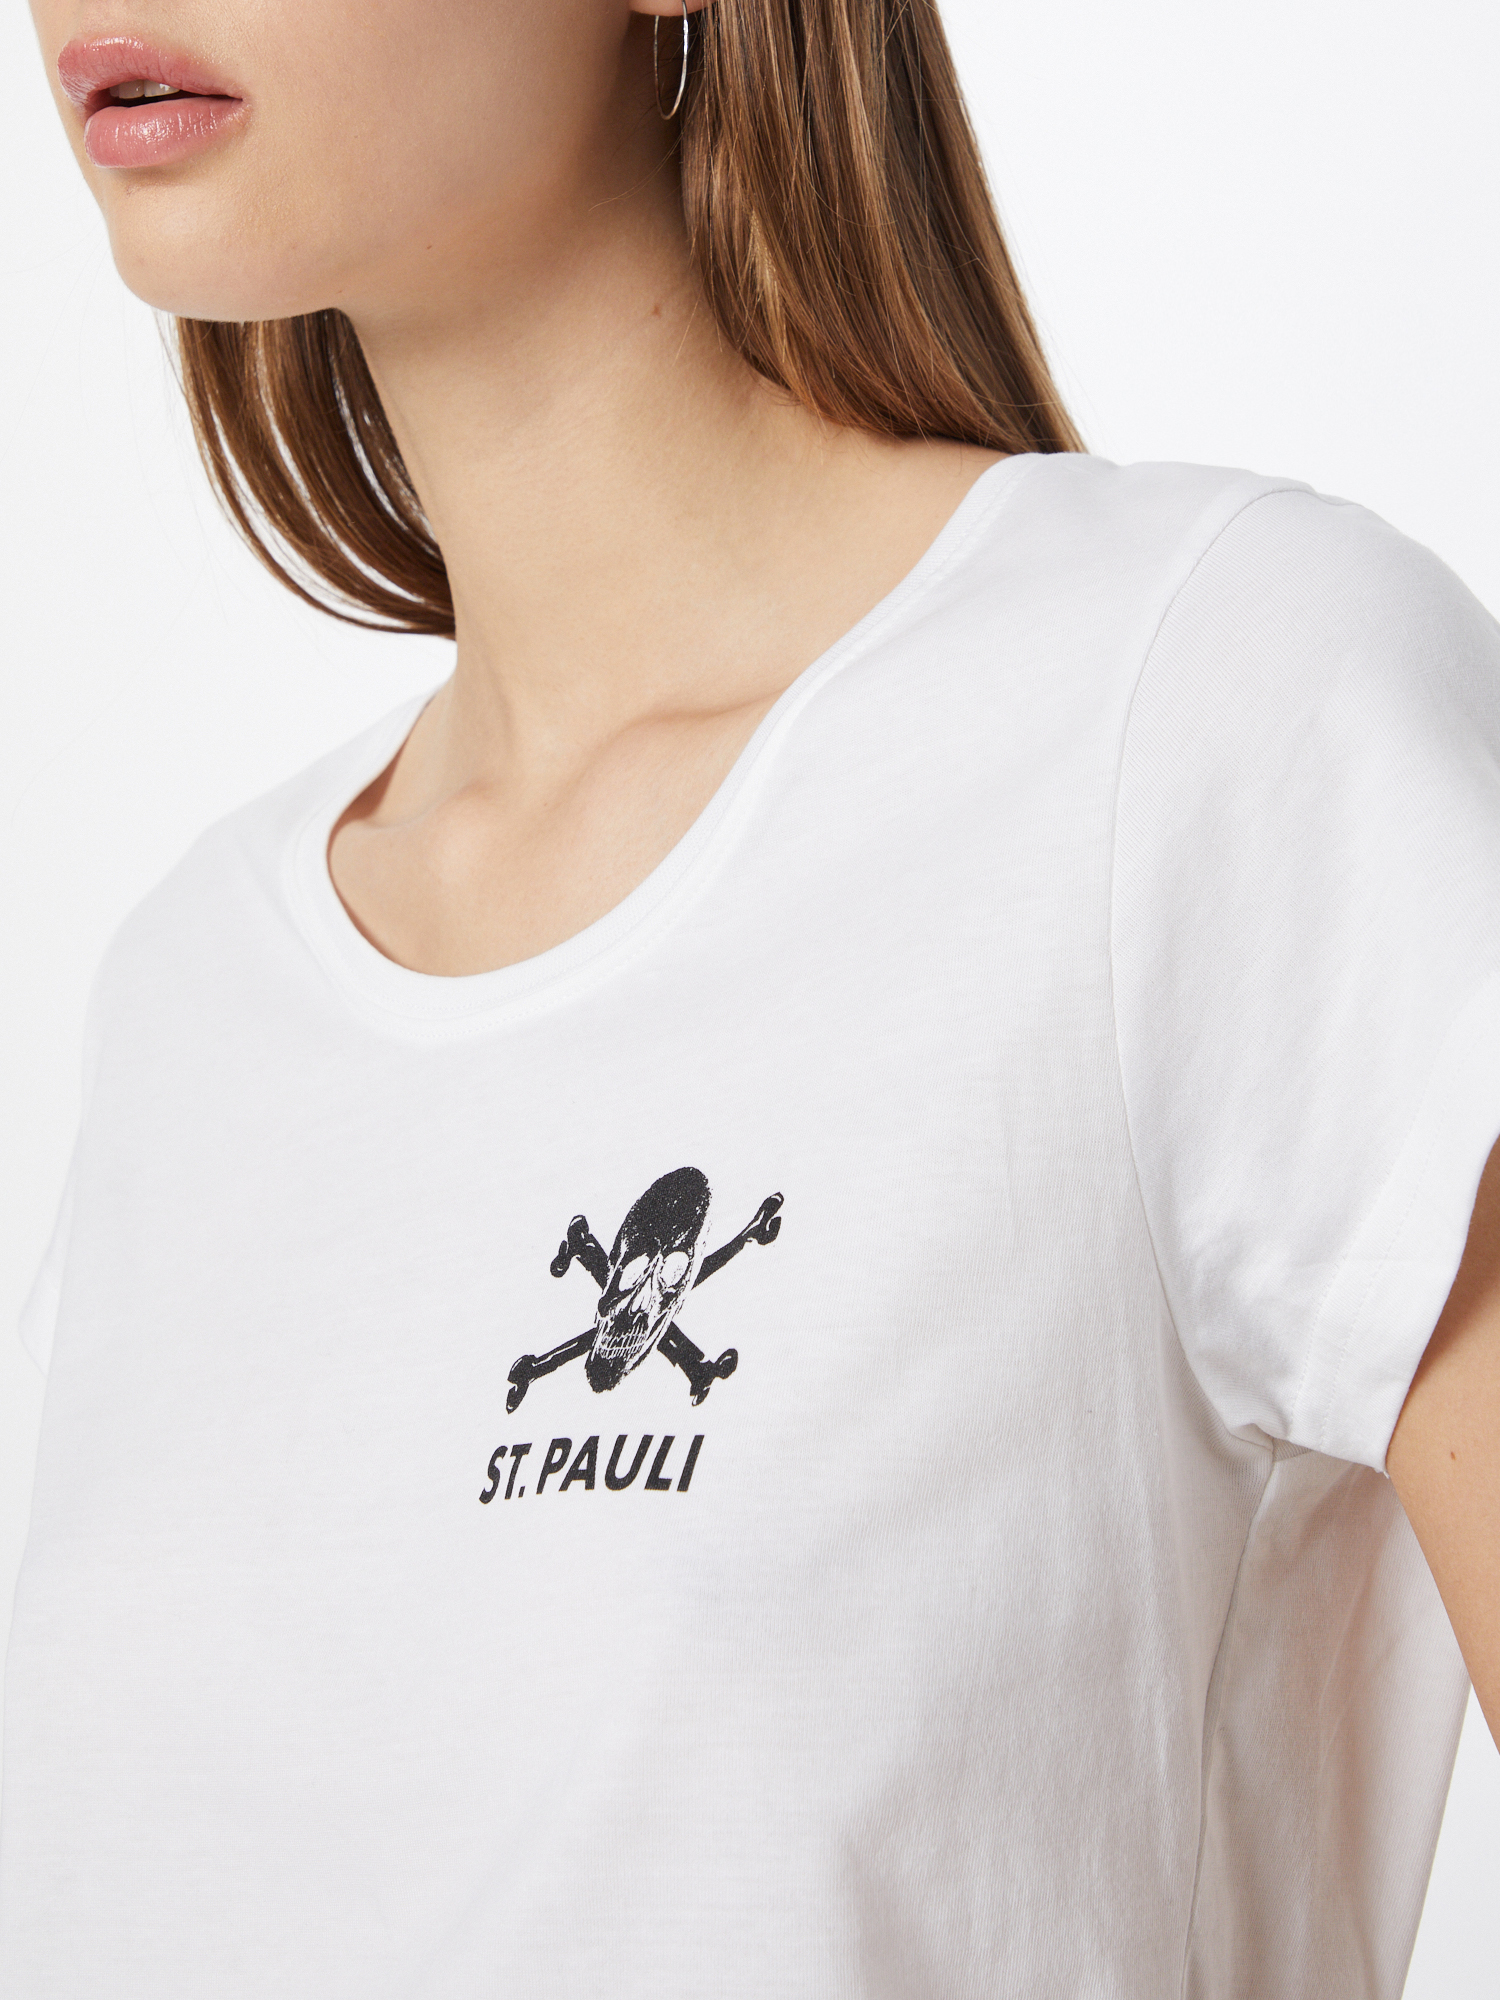 FC St. Pauli T-Shirt No Place For in Weiß 